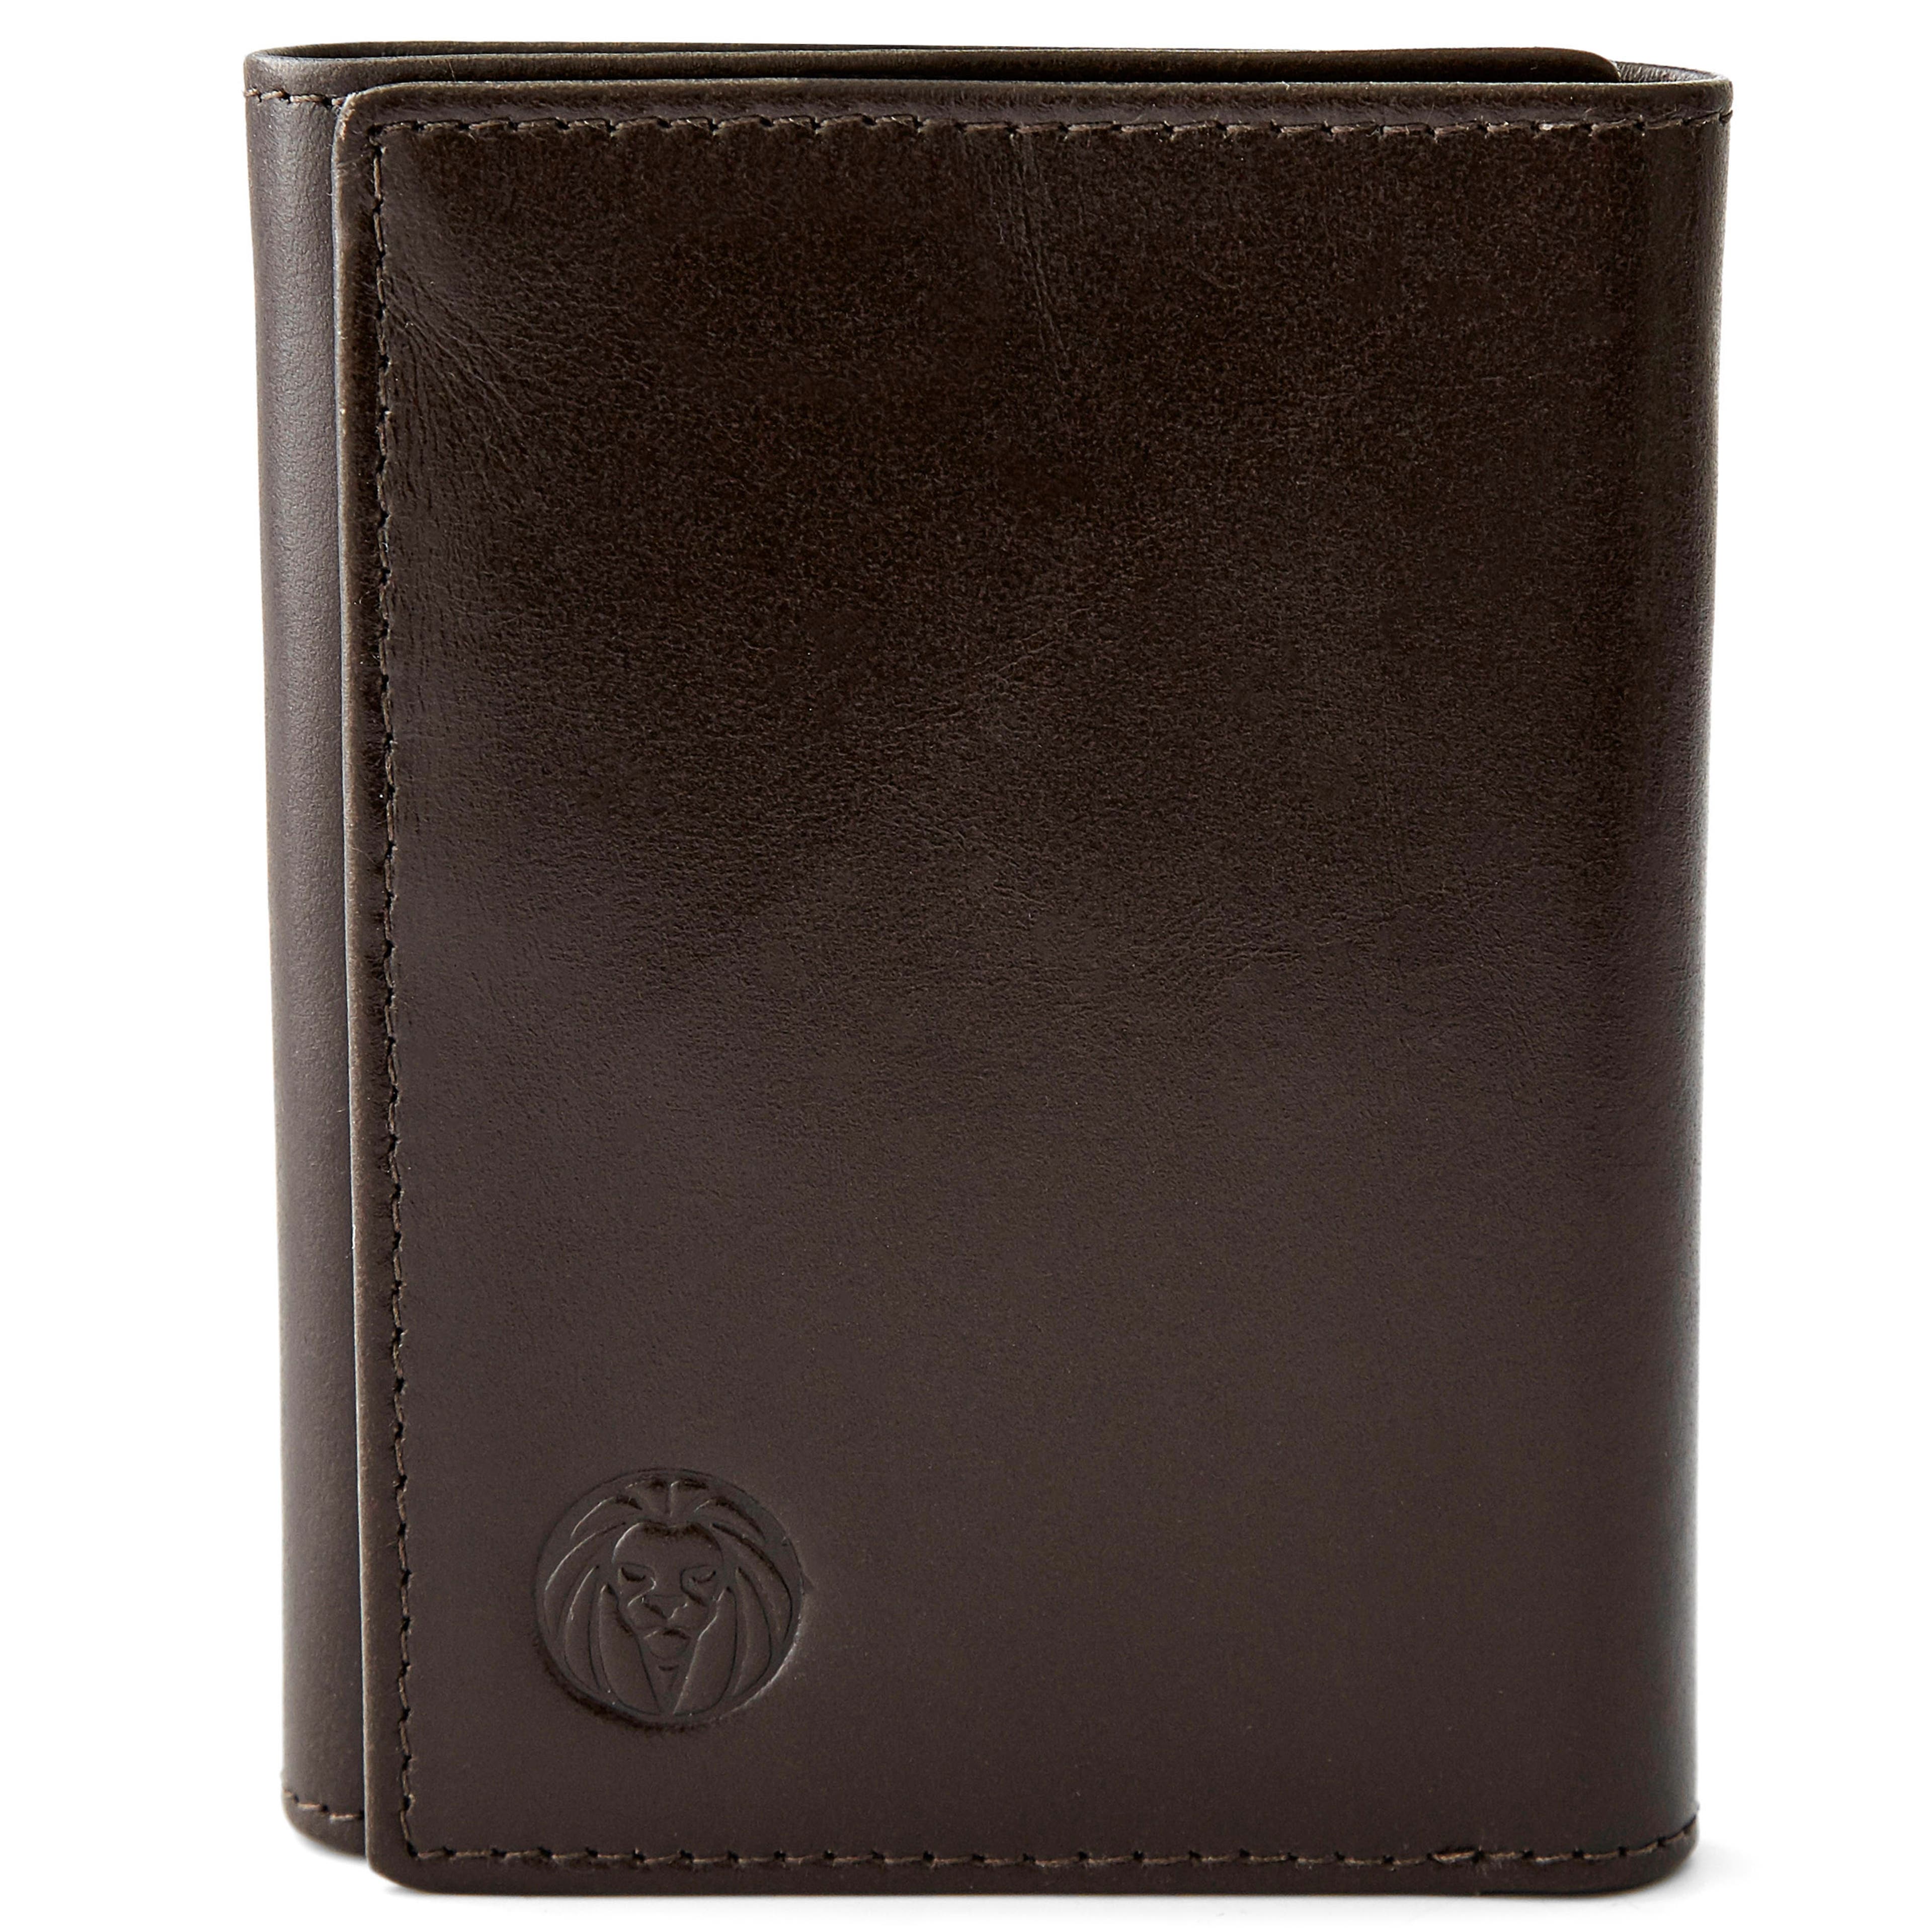 Brown RFID TriFold Wallet